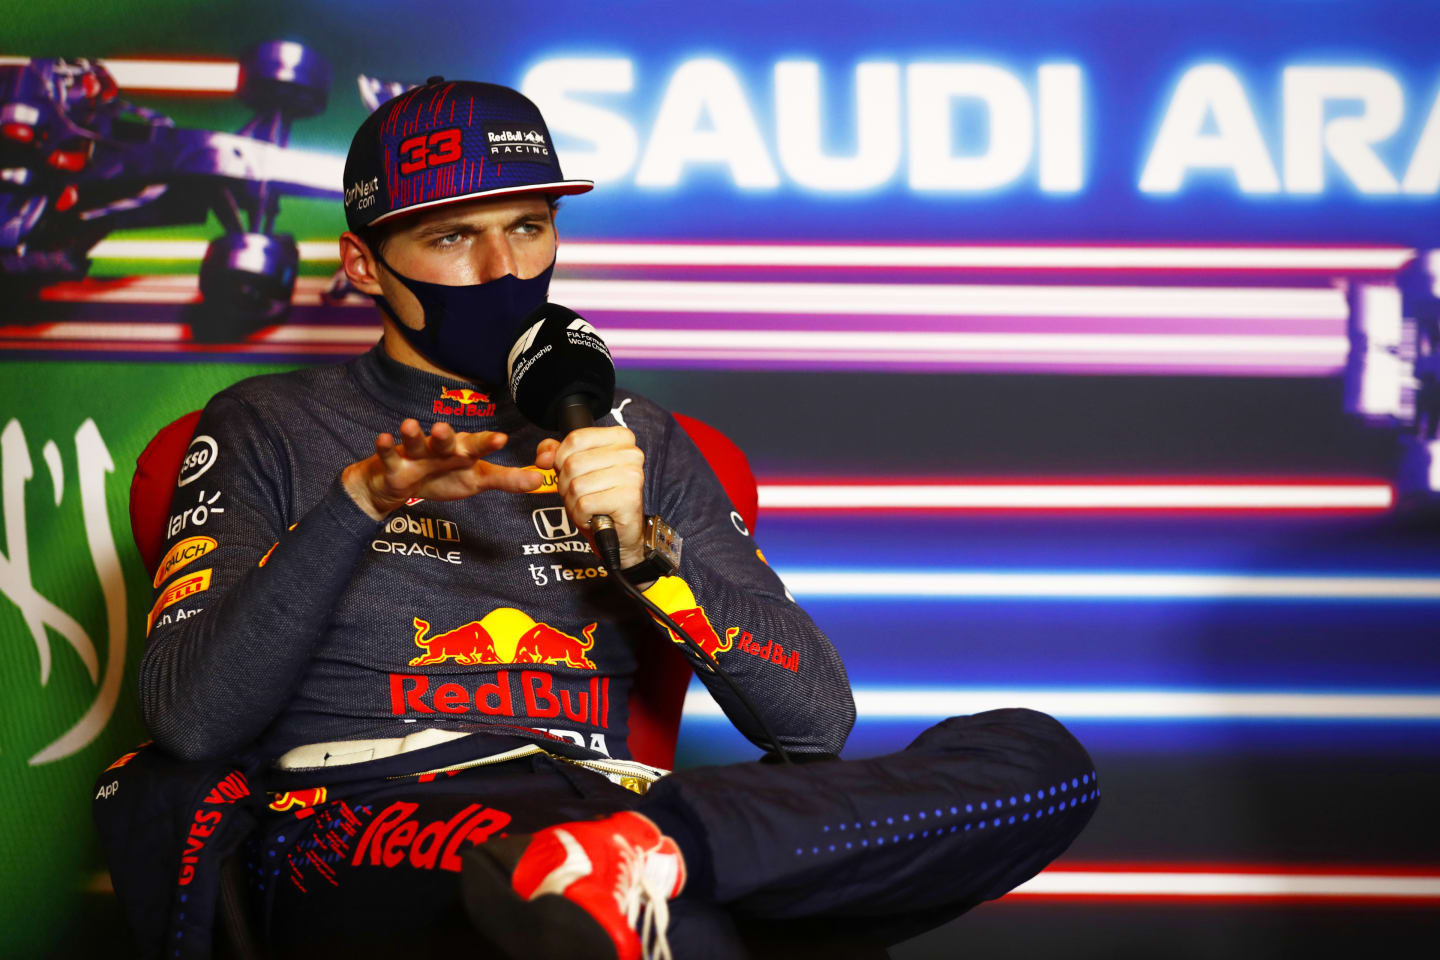 JEDDAH, SAUDI ARABIA - DECEMBER 05: Second placed Max Verstappen of Netherlands and Red Bull Racing talks in the press conference after the F1 Grand Prix of Saudi Arabia at Jeddah Corniche Circuit on December 05, 2021 in Jeddah, Saudi Arabia. (Photo by Sam Bloxham - Pool/Getty Images)